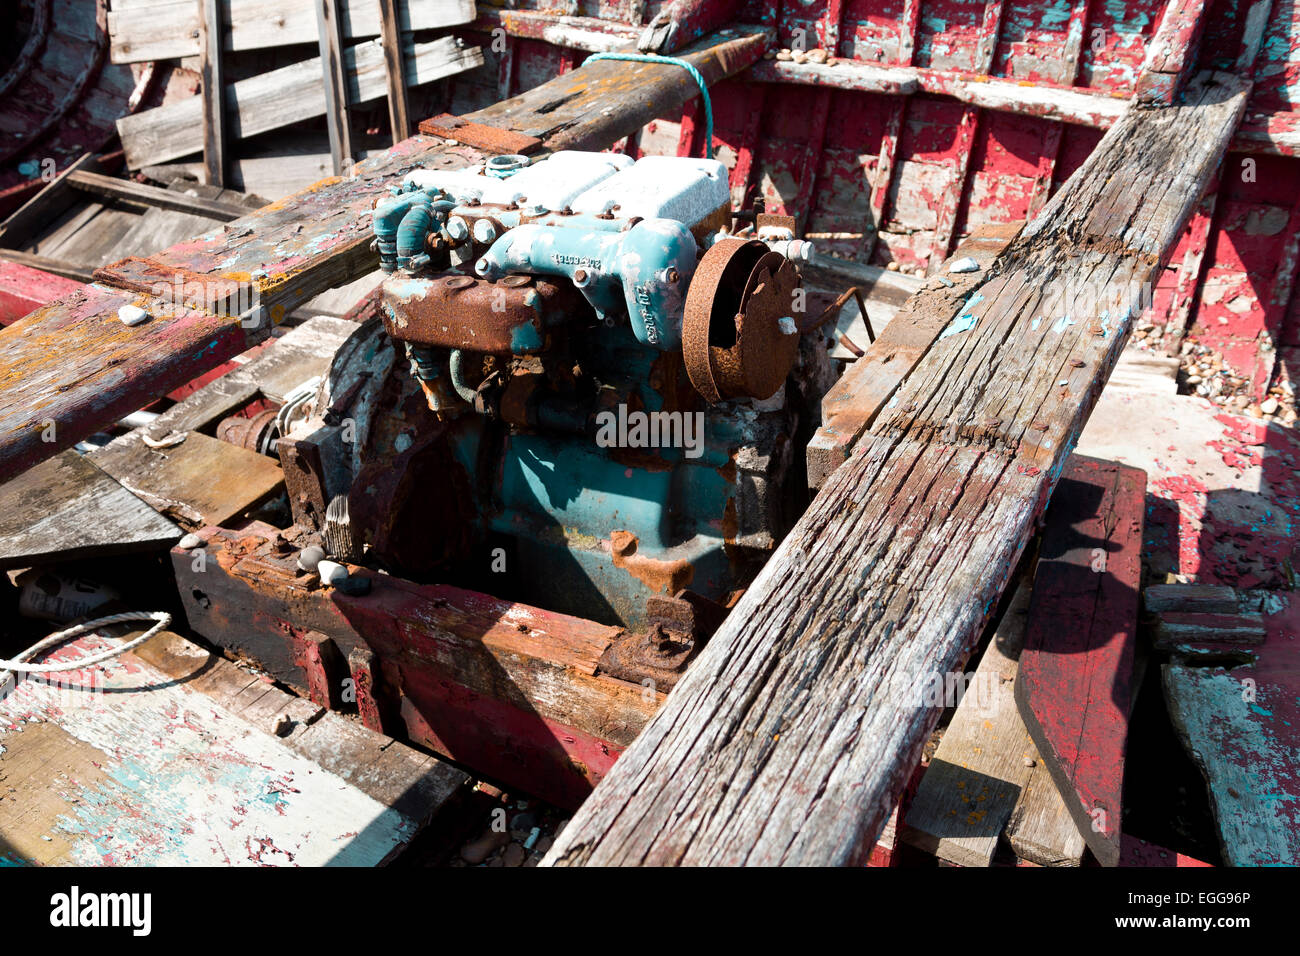 Image of a boat engine in a boat of disrepair and not seaworthy Stock Photo